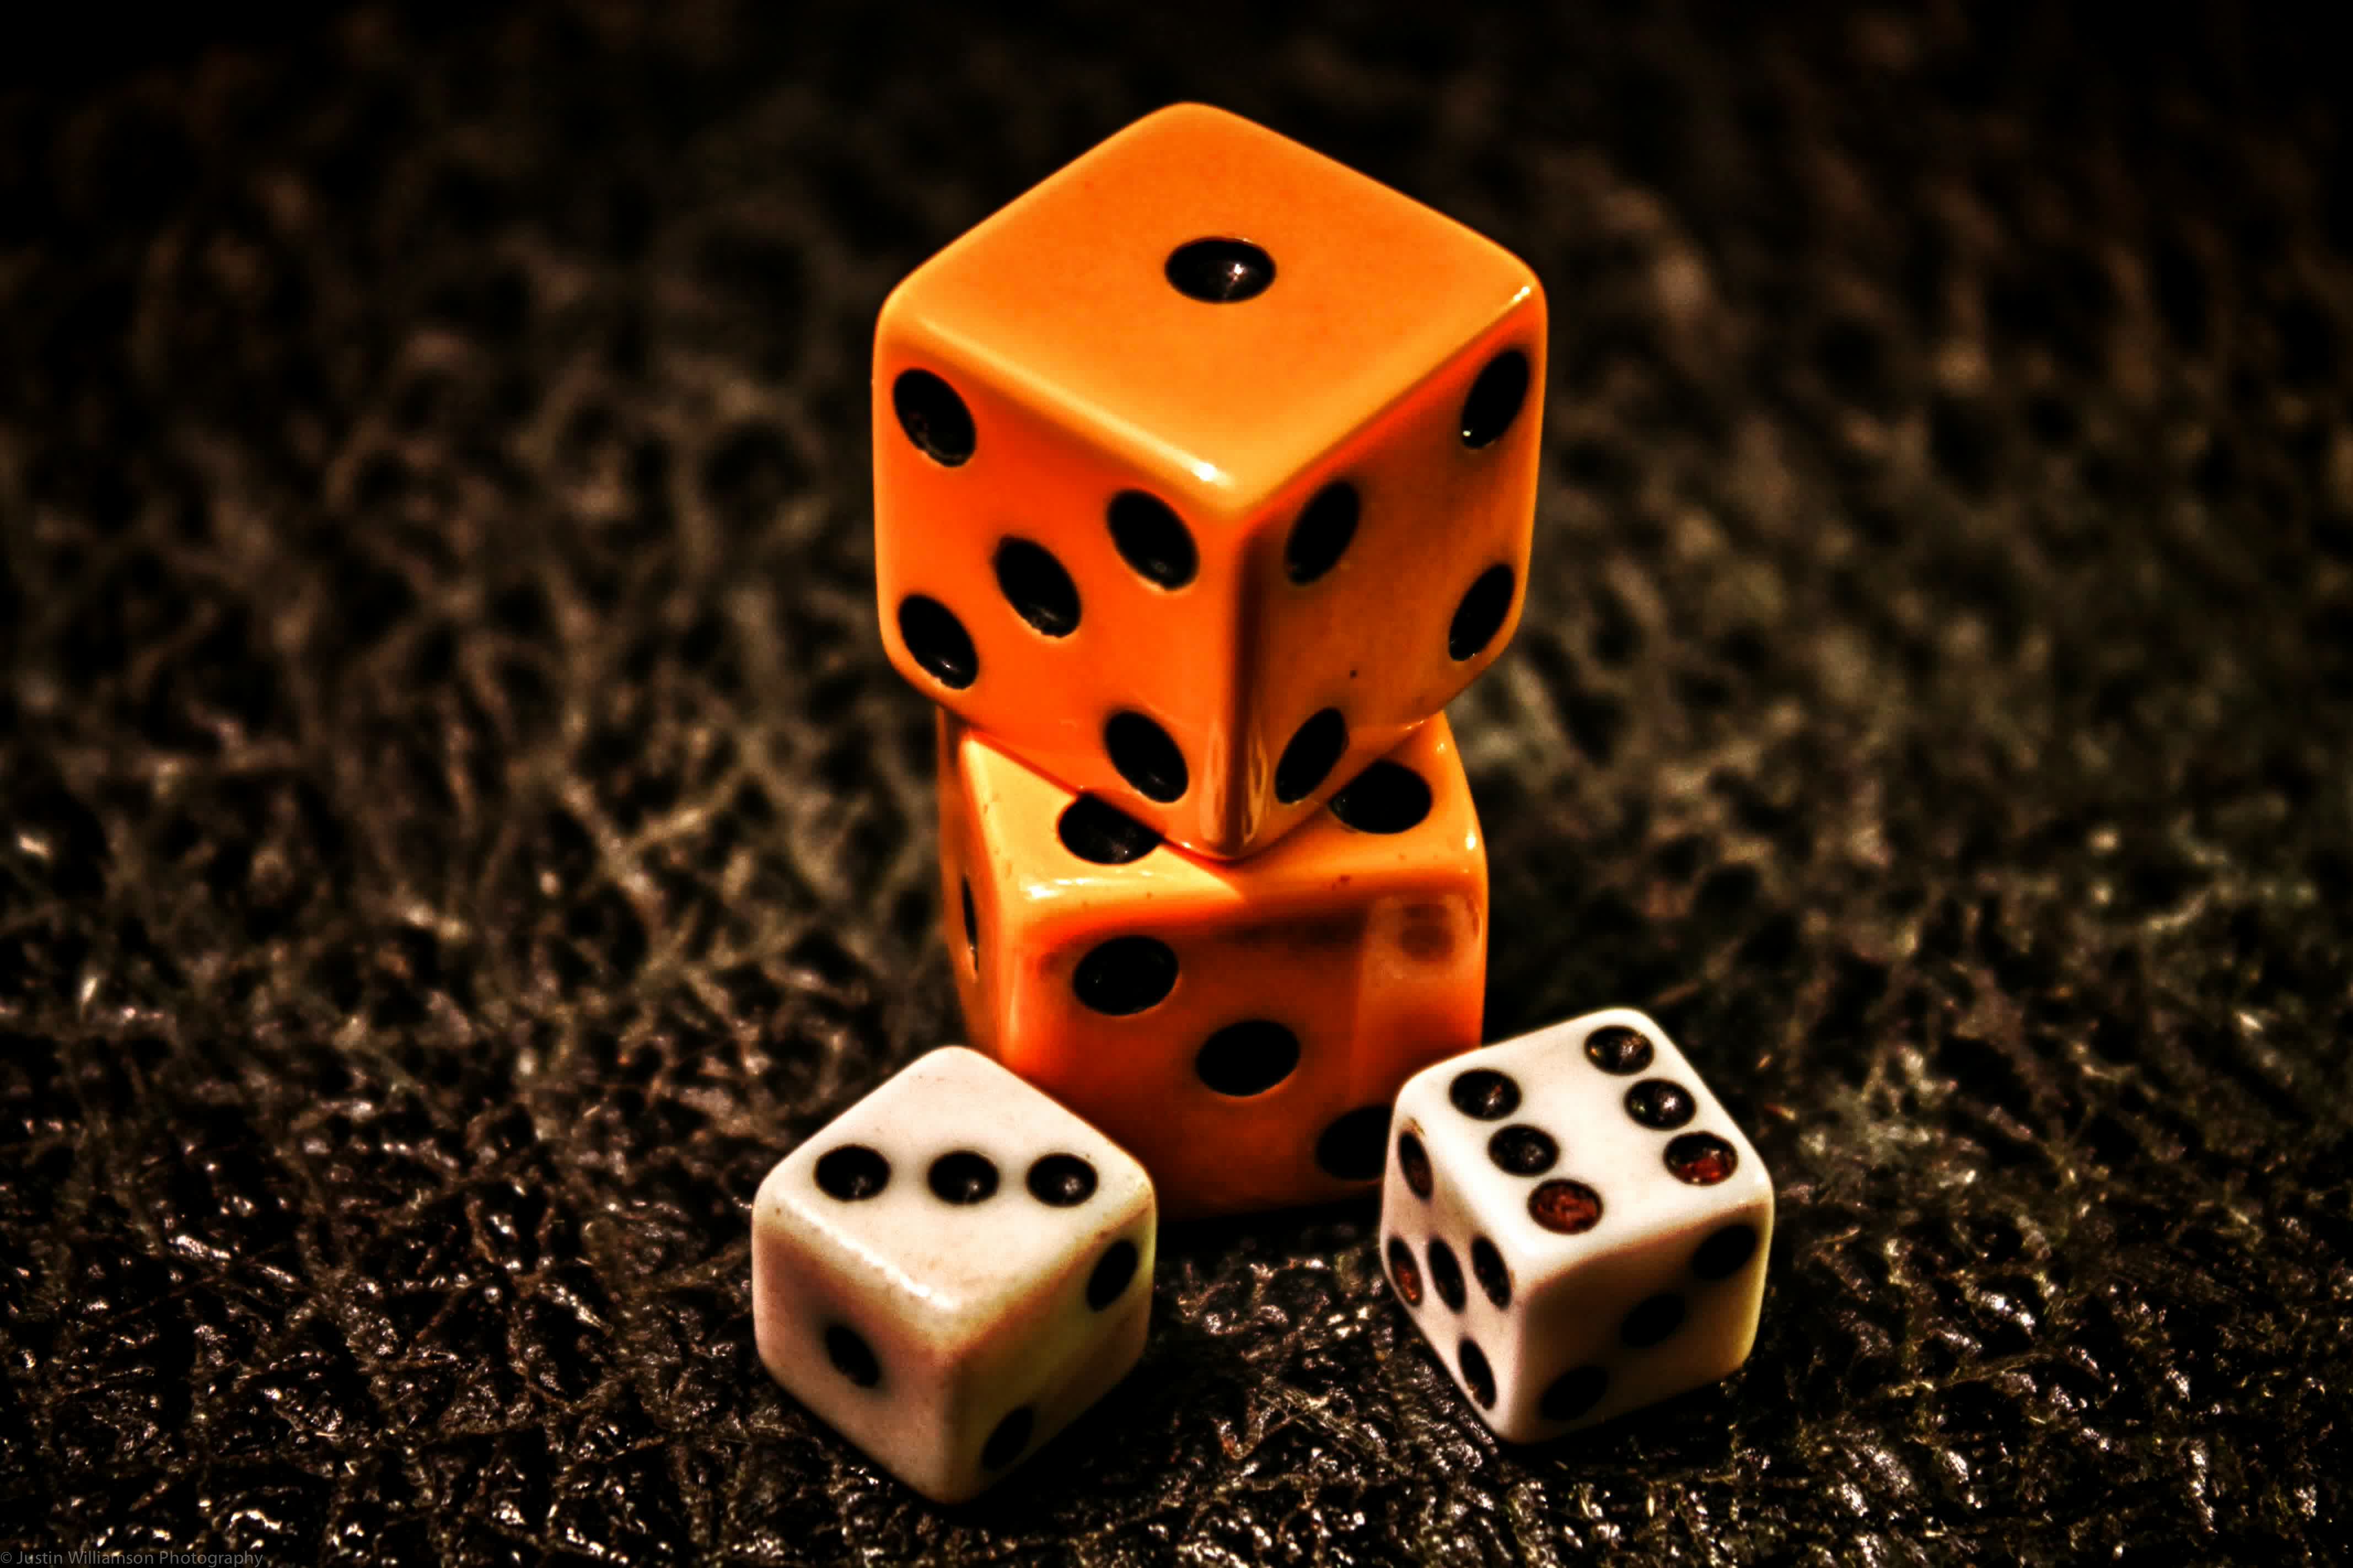 Blue Dice Background Images HD Pictures and Wallpaper For Free Download   Pngtree